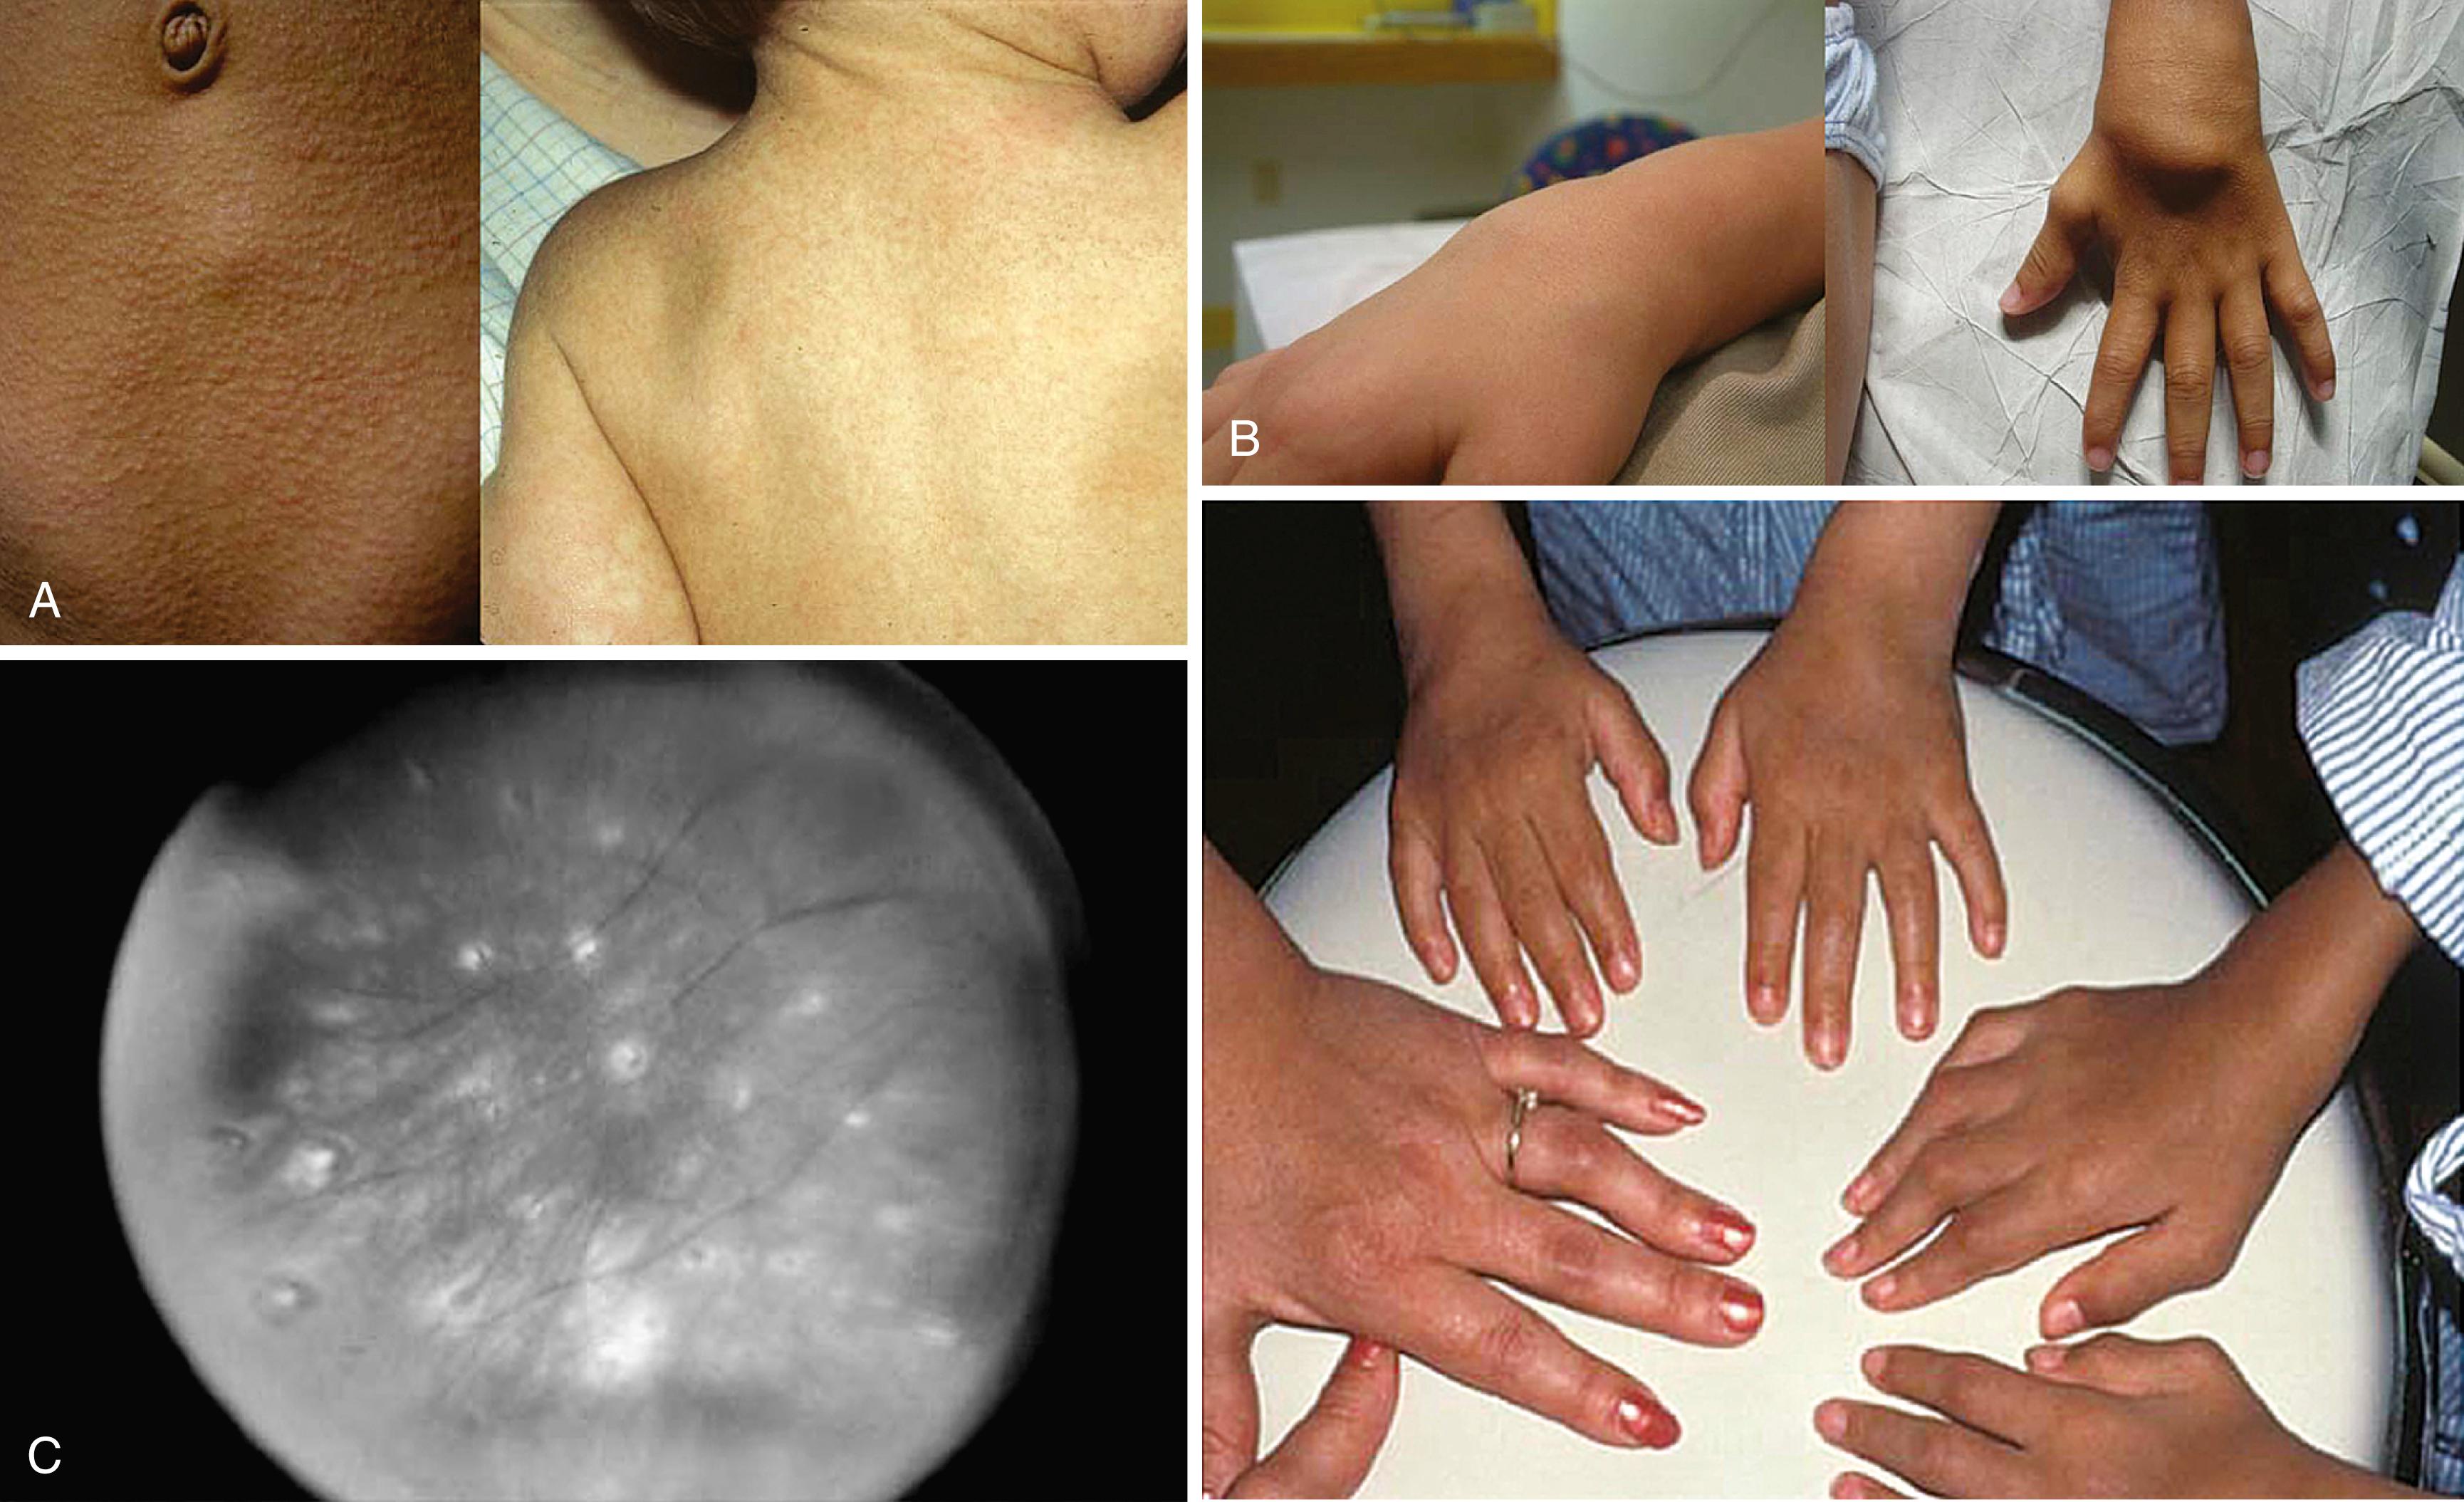 Fig. 41.4, Clinical triad typical of NOD2- associated pediatric sarcoidosis. A, Cutaneous features with fine maculopapular erythematous/tan eruption with ichthyosiform appearance (right). B, Typical “boggy” synovitis with preserved range of motion and cyst-like synovial swelling. Below, a family with NOD2 -associated polyarthritis and proximal interphalangeal (PIP) contractures causing camptodactyly. C, Multifocal choroiditis characteristic of granulomatous panuveitis.